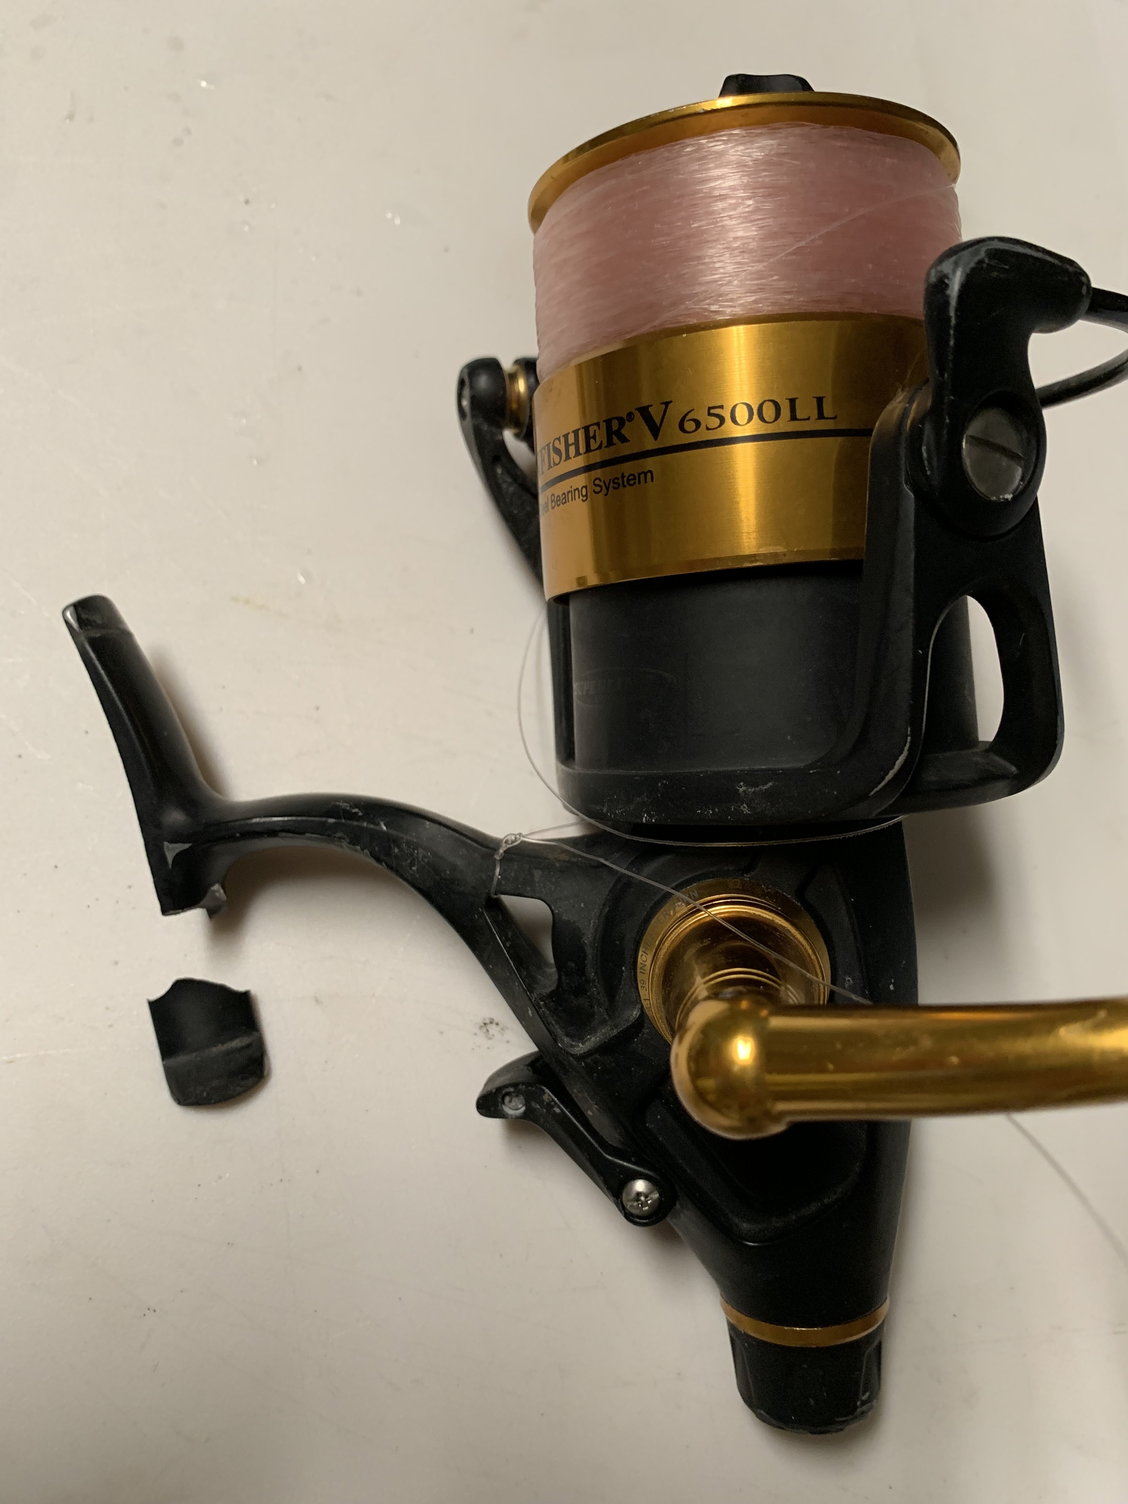 How good is Penn's Warranty- My Reel Cracked. - The Hull Truth - Boating  and Fishing Forum